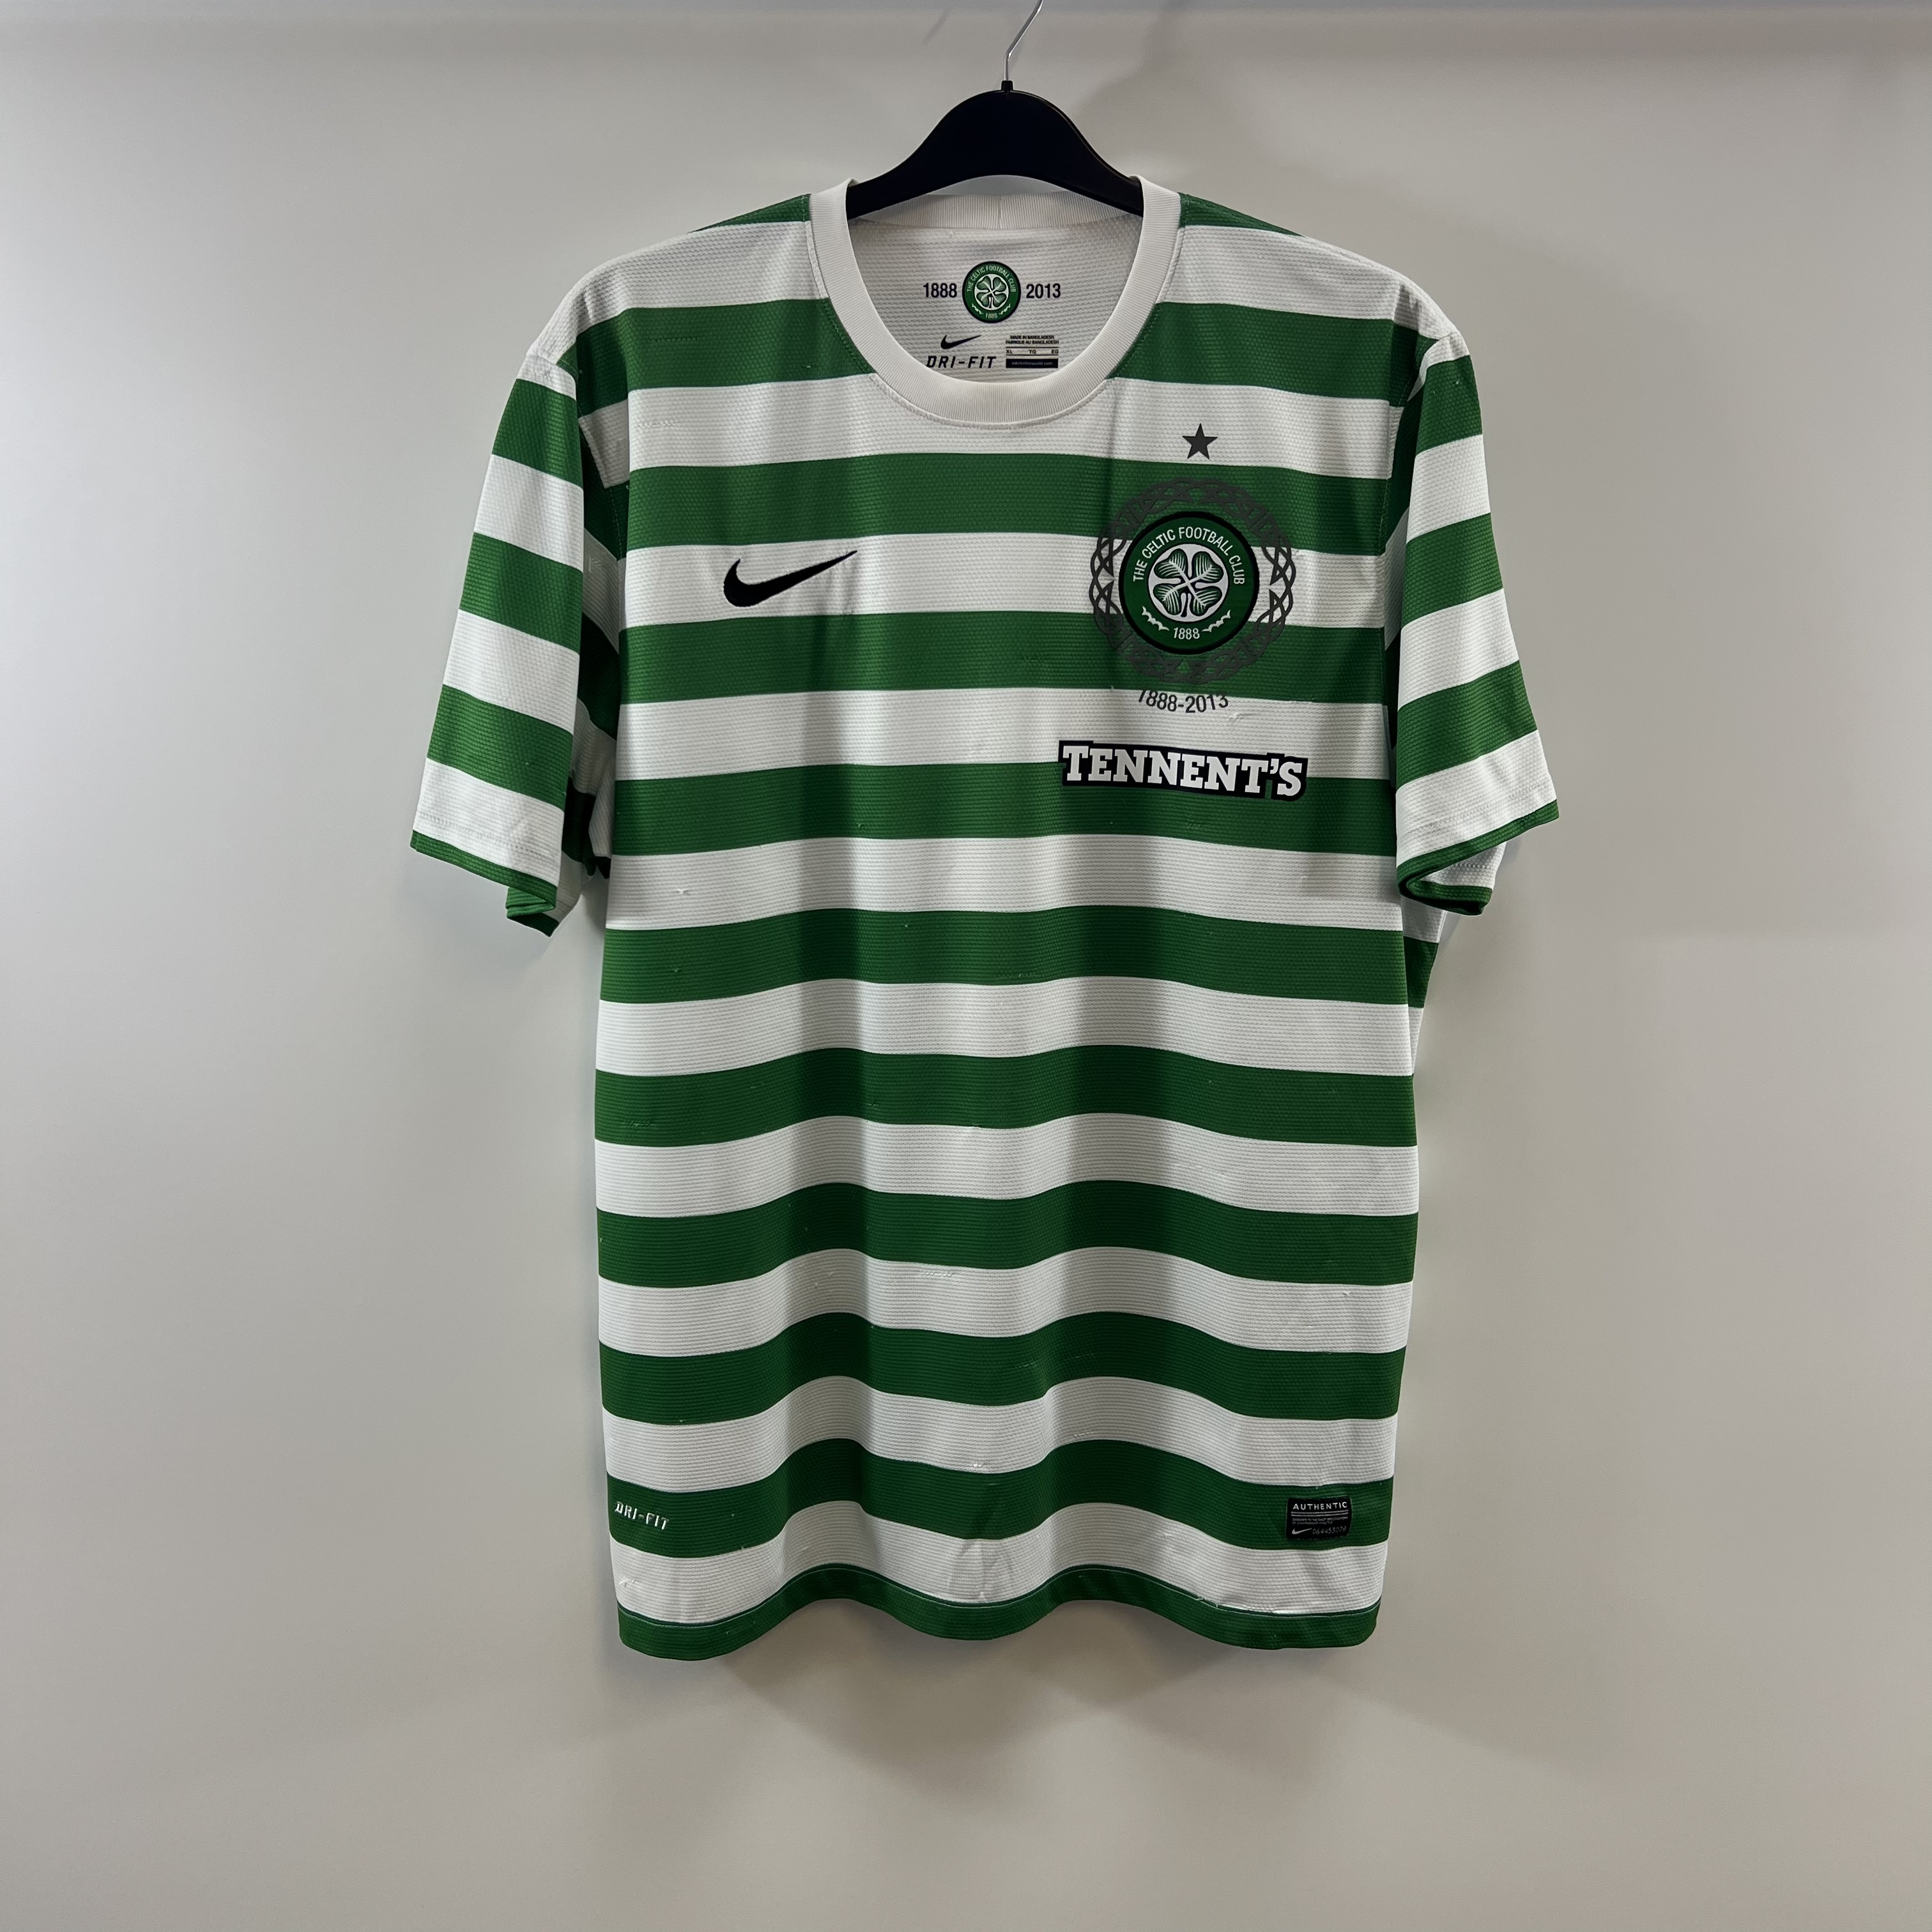 Celtic 12/13 Nike 125th Anniversary Home Kit - Football Shirt Culture -  Latest Football Kit News and More